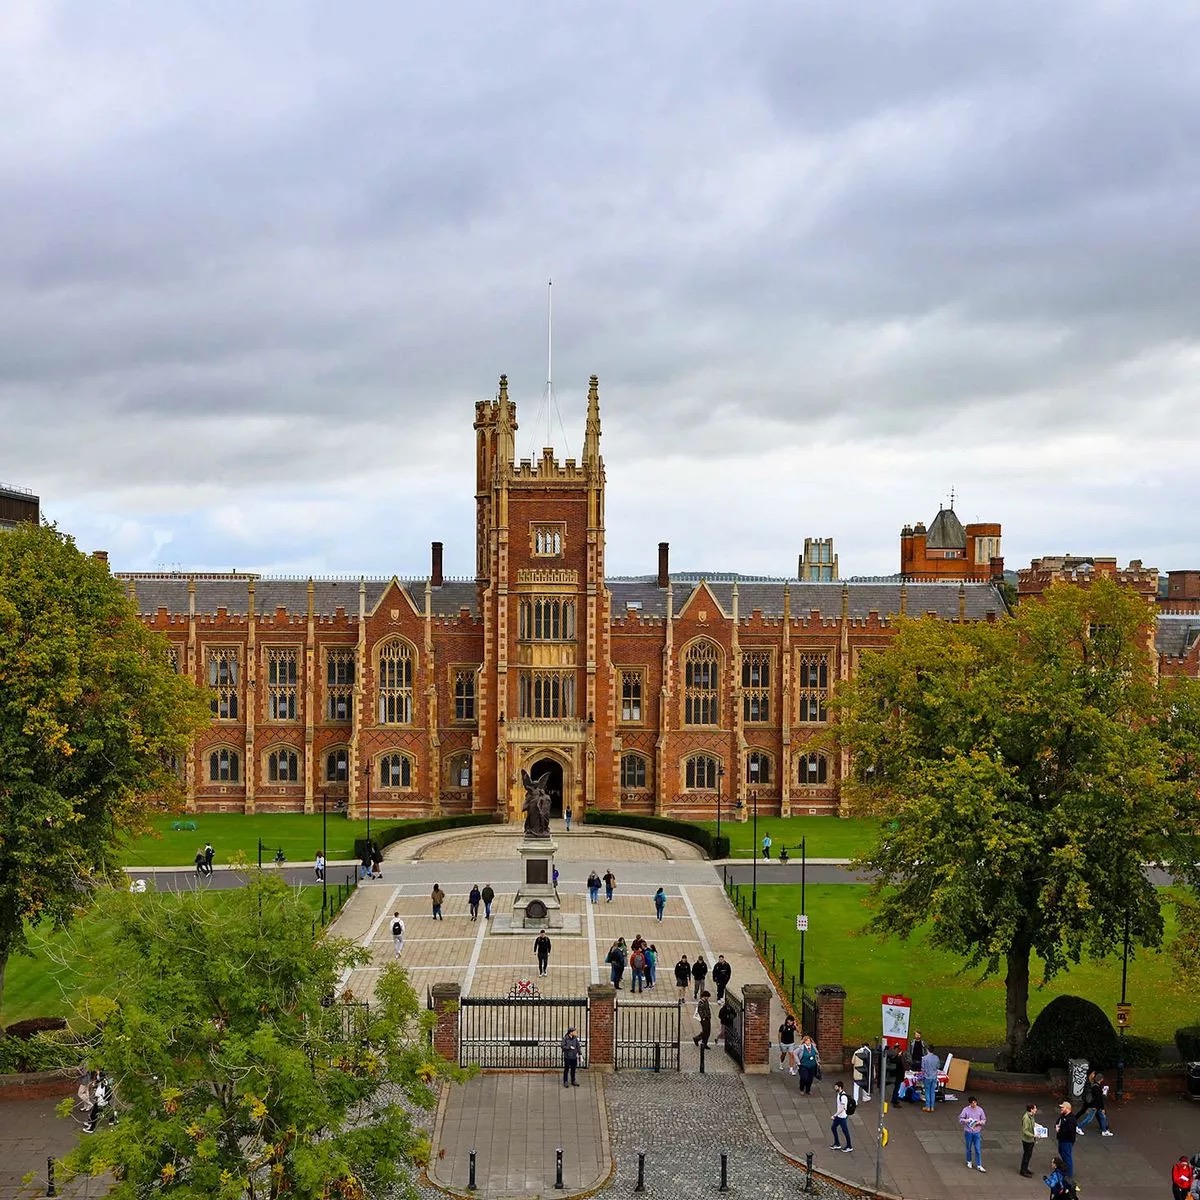 Job Alert! We're recruiting a new Full Professor in International Relations here @HAPPatQUB @QUBelfast Details can be found here: hrwebapp.qub.ac.uk/tlive_webrecru… Get in touch if you've got any questions. @MYBISA @isanet @europeanisa